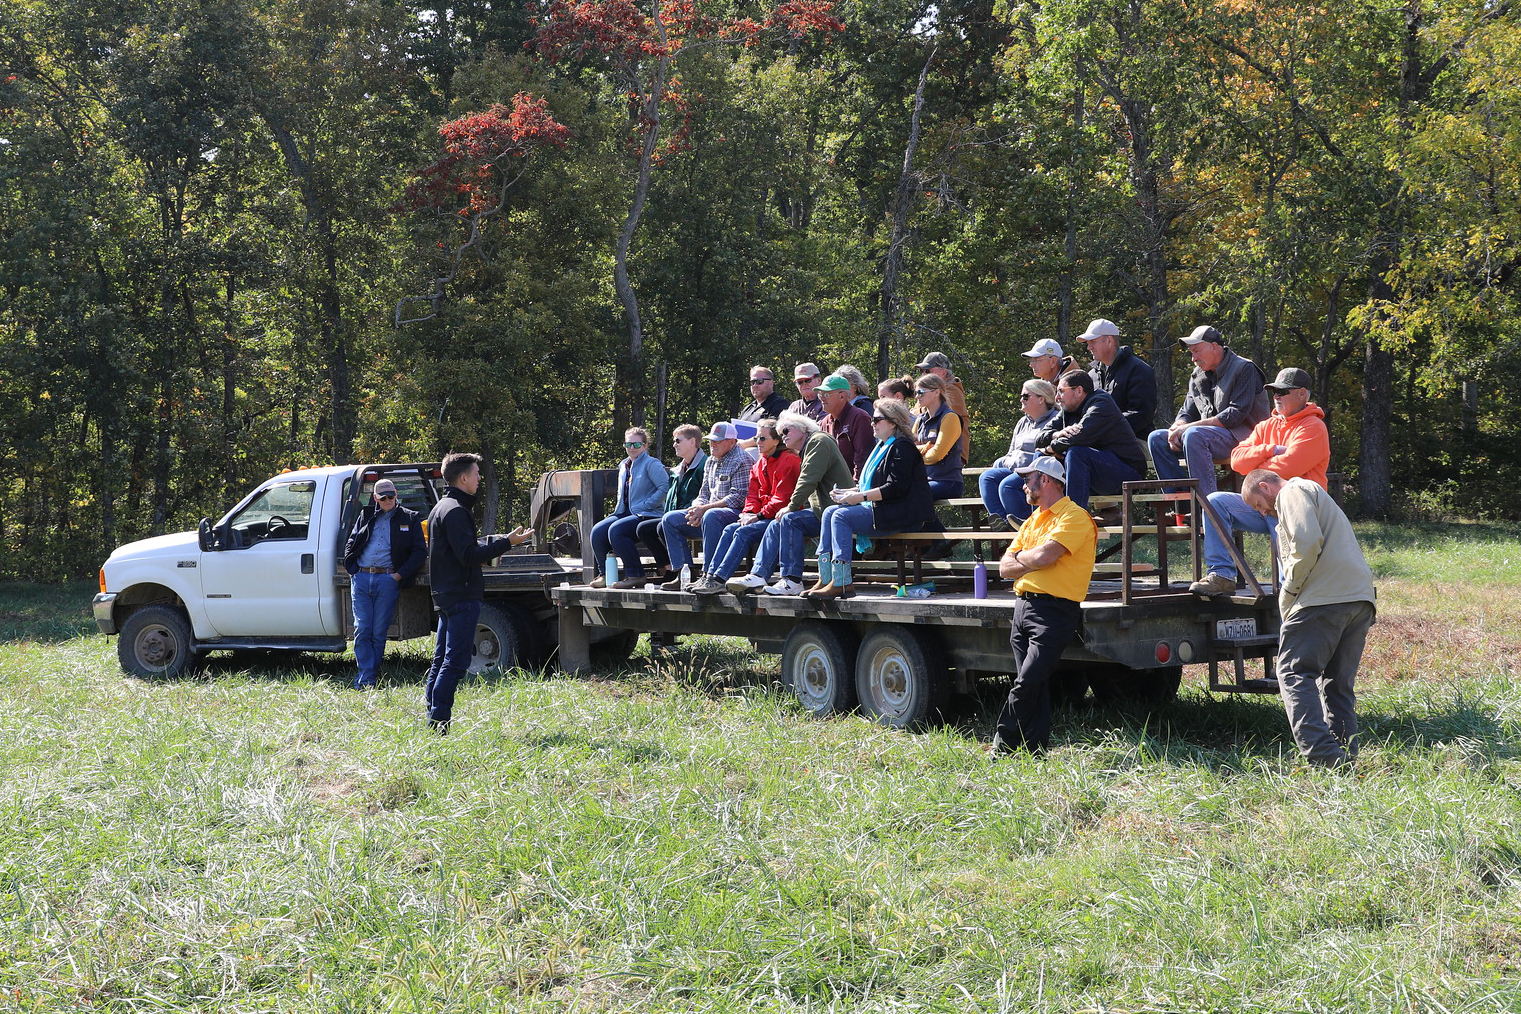 MU Extension specialists will discuss alternative forages for drought during the annual Wurdack Center producer field day on Oct. 6. File photo by Julie Harker.